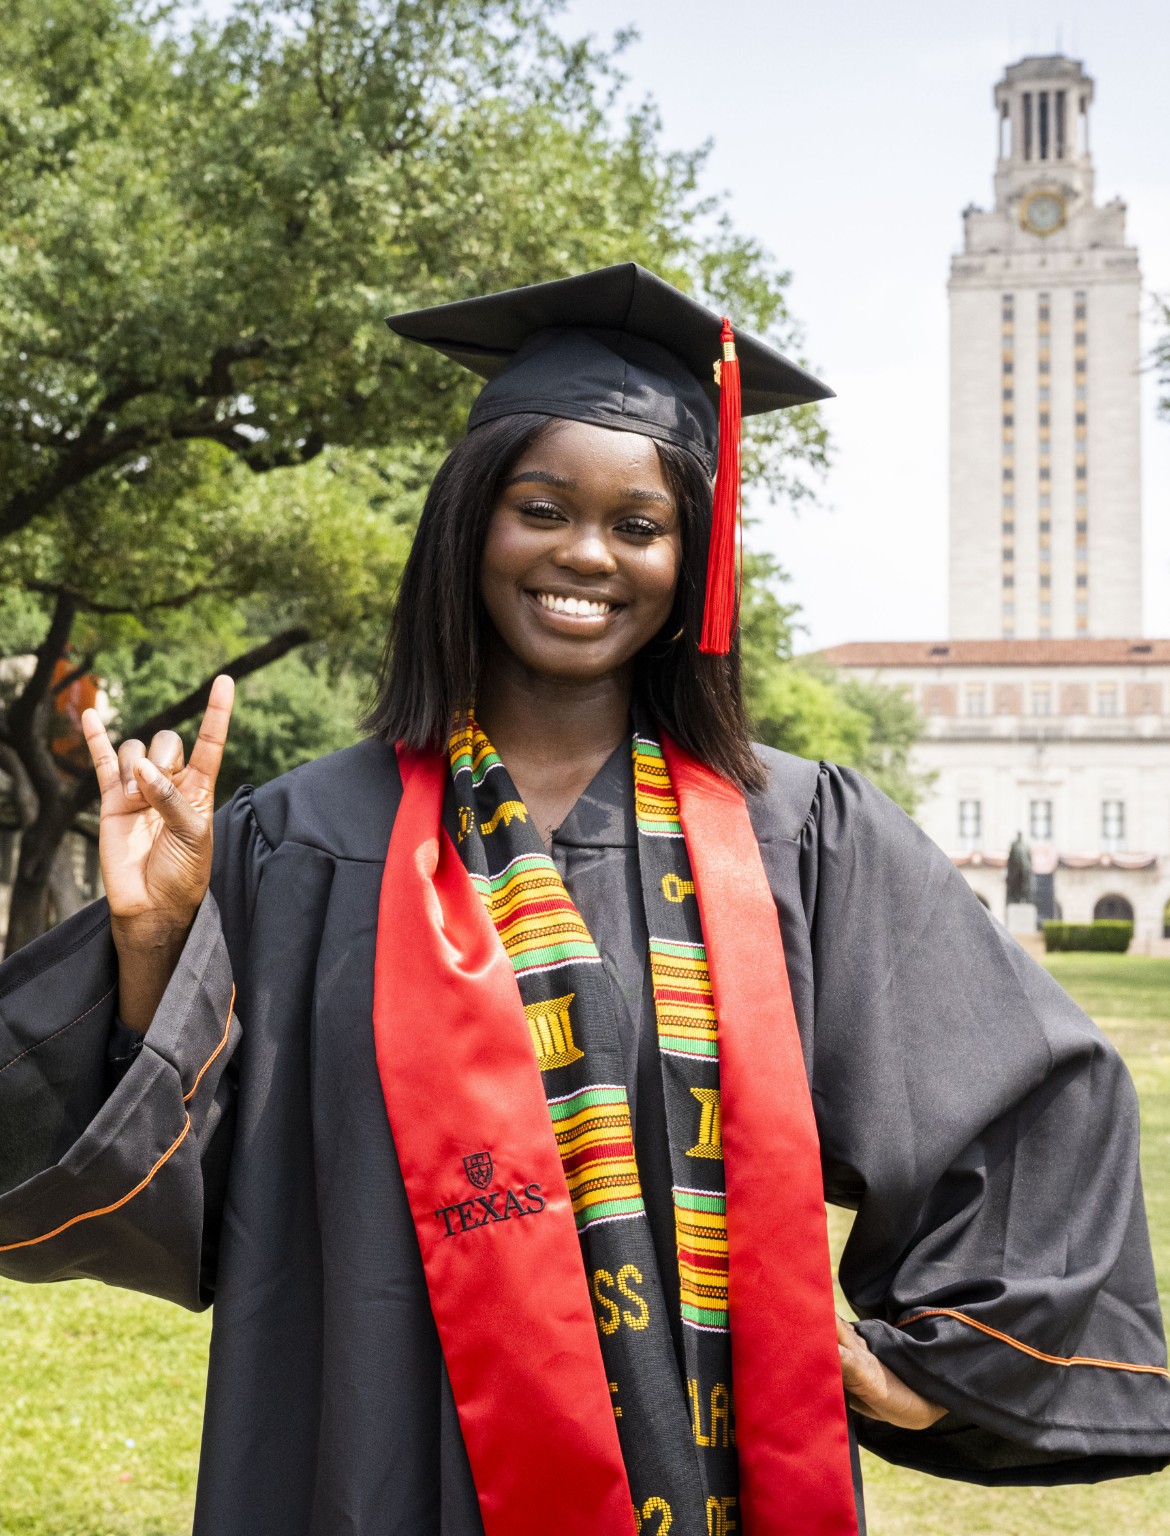 Student in graduation regalia in front of the UT tower, showing hook 'em hand signal